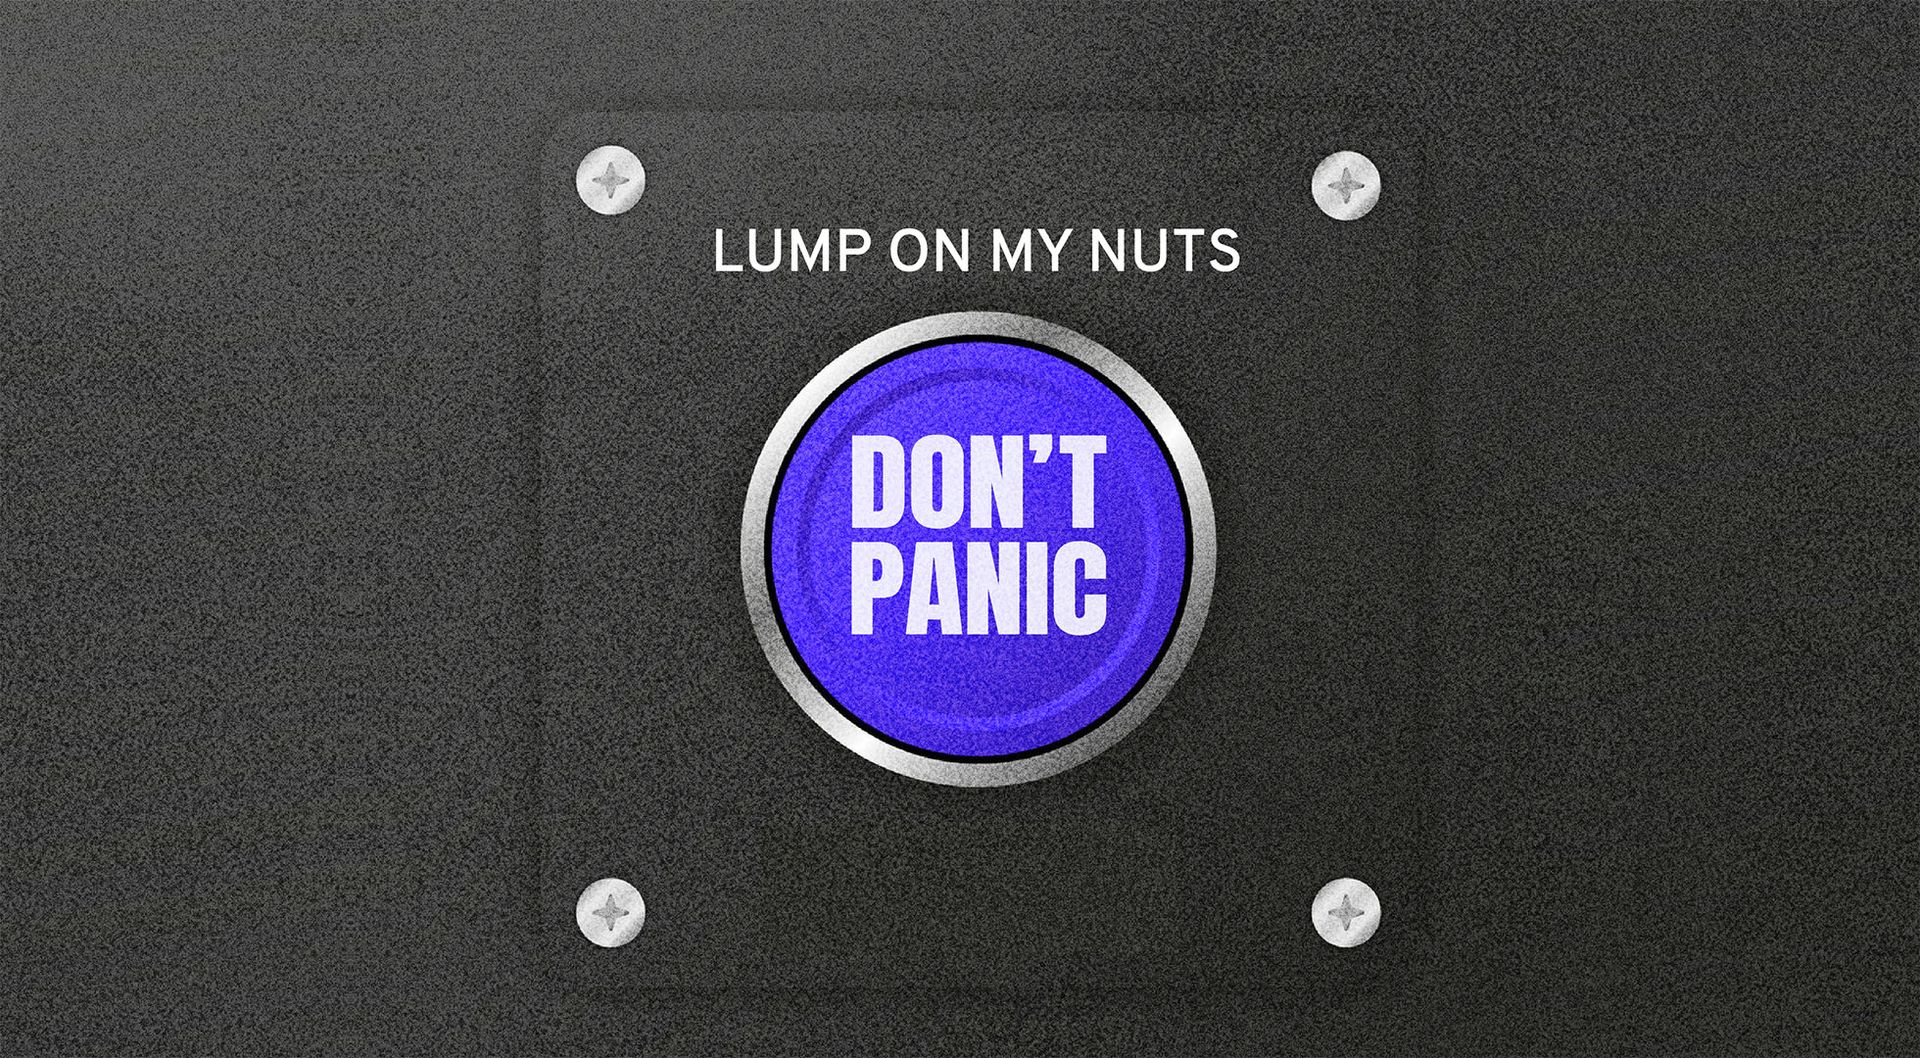 Stylised graphic that says "DON'T PANIC" with a headline saying "LUMP ON MY NUTS"